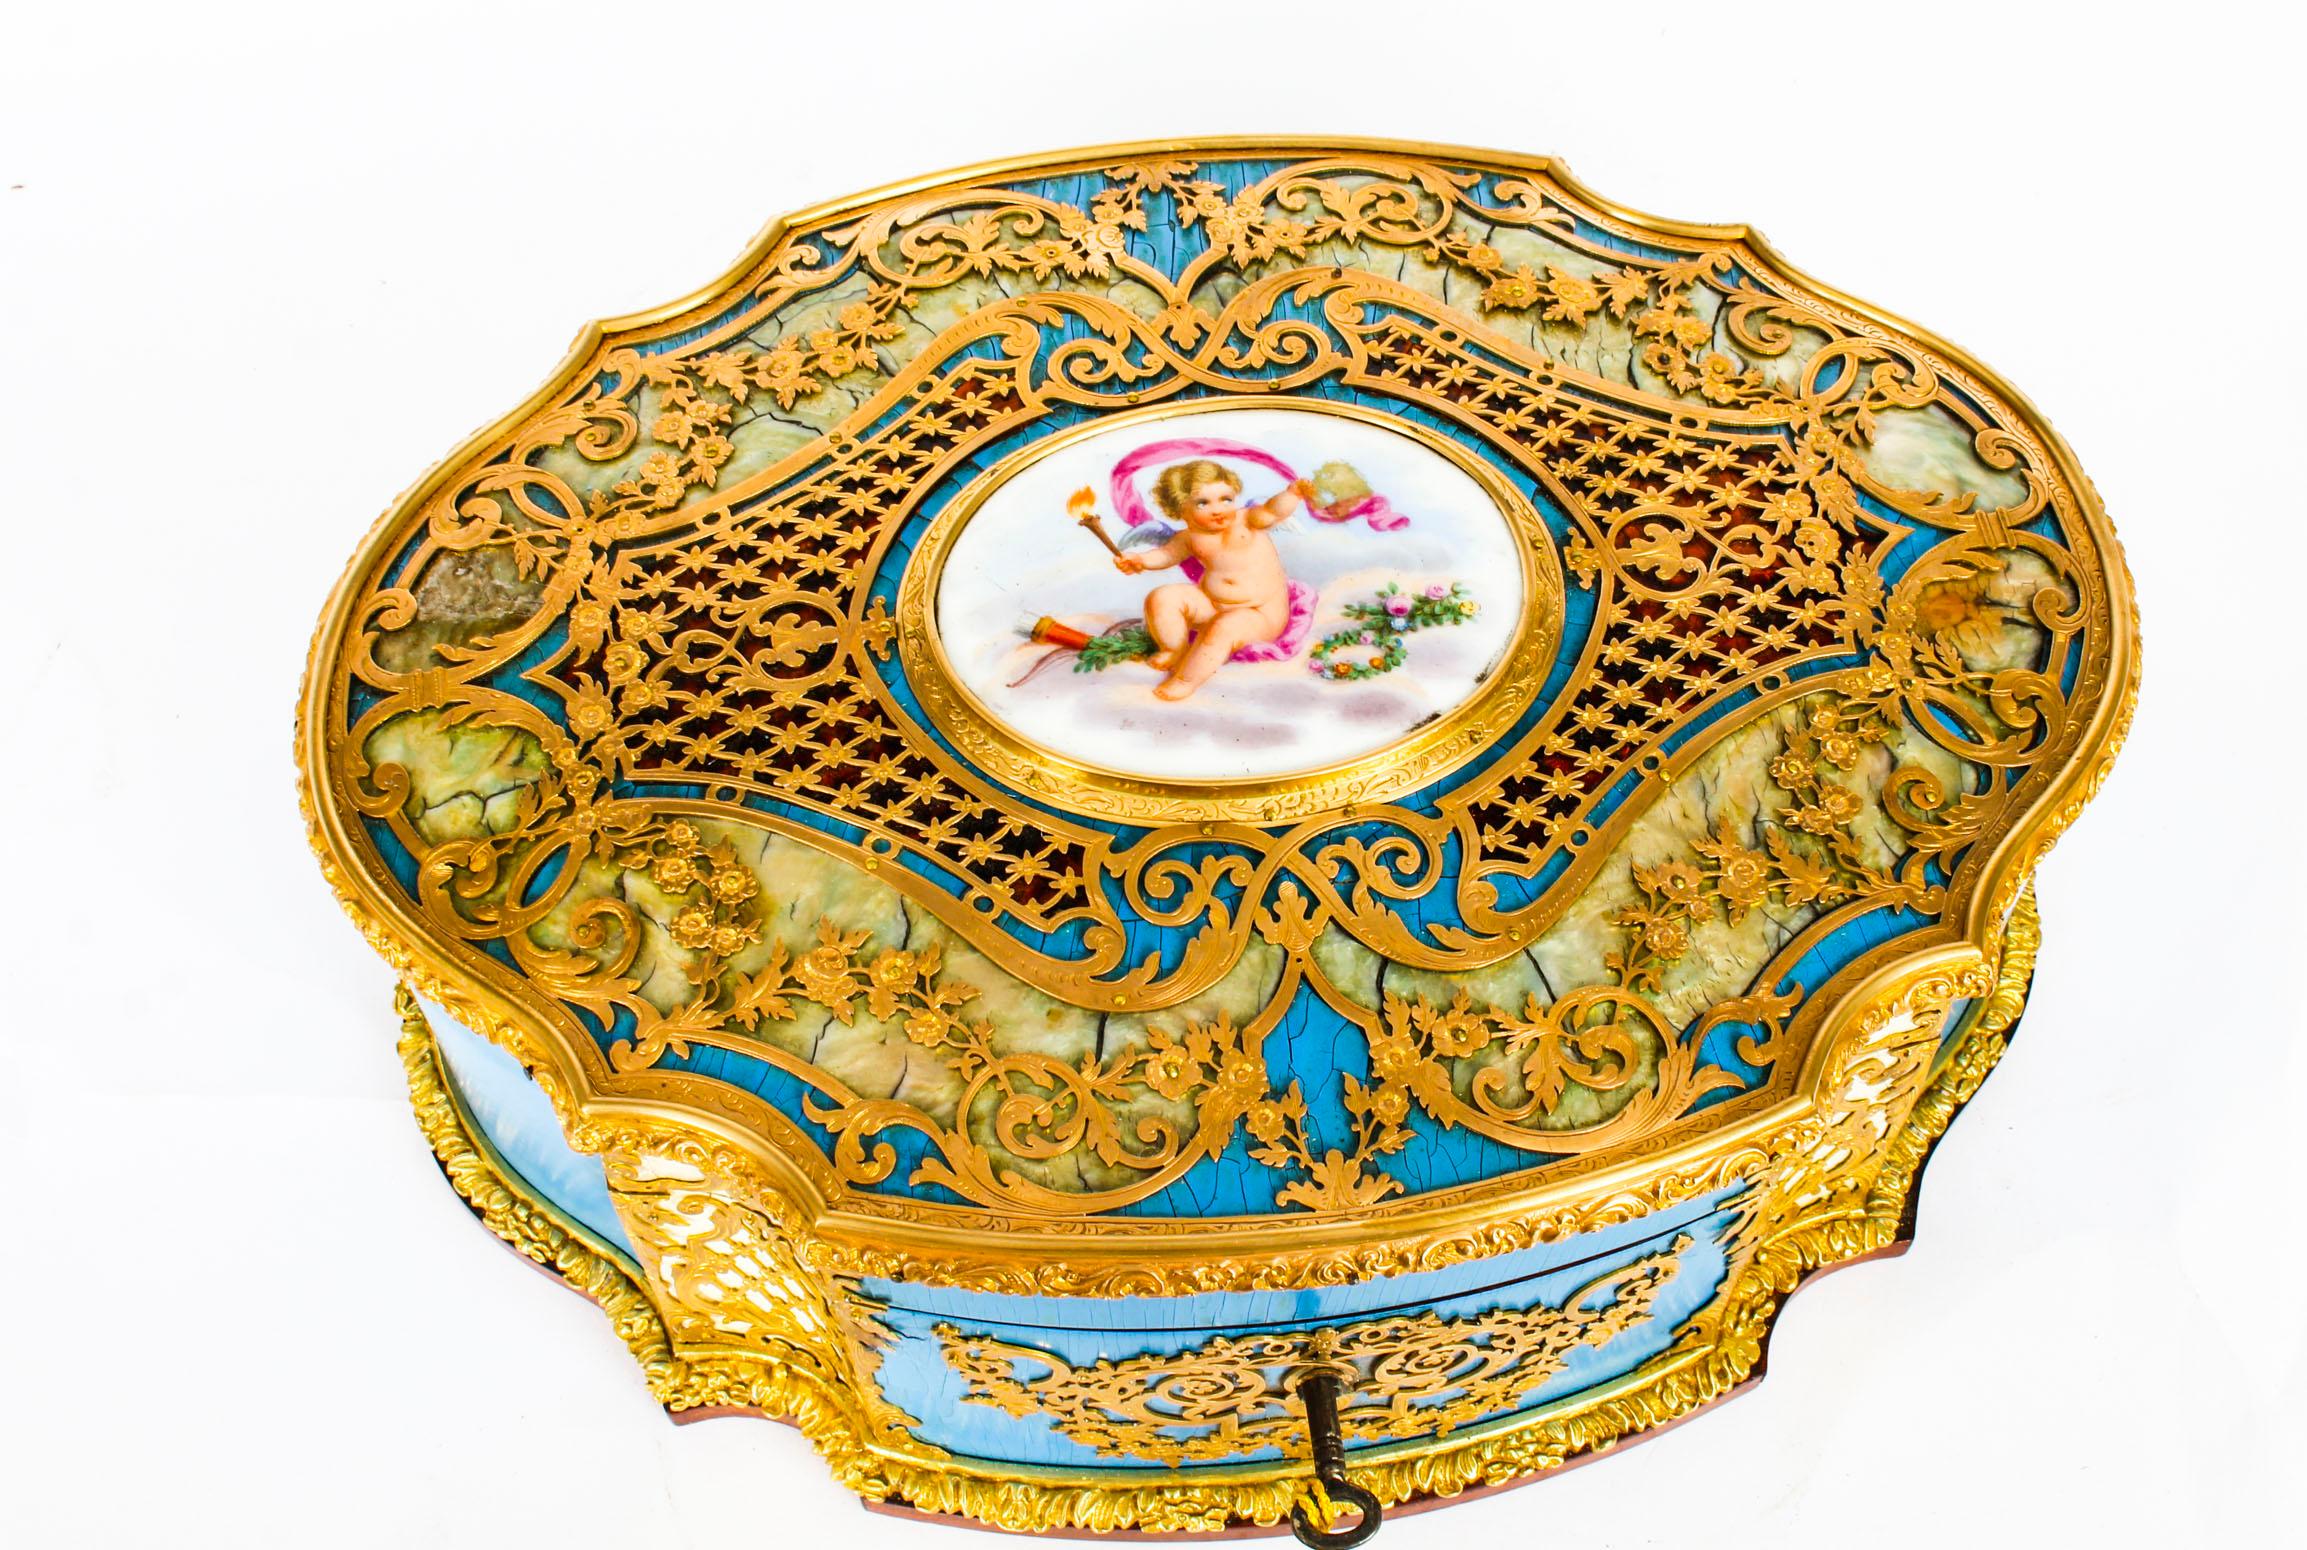 Hand-Painted Antique French Enamel Ormolu and Mother of Pearl Jewelry Casket, 19th Century